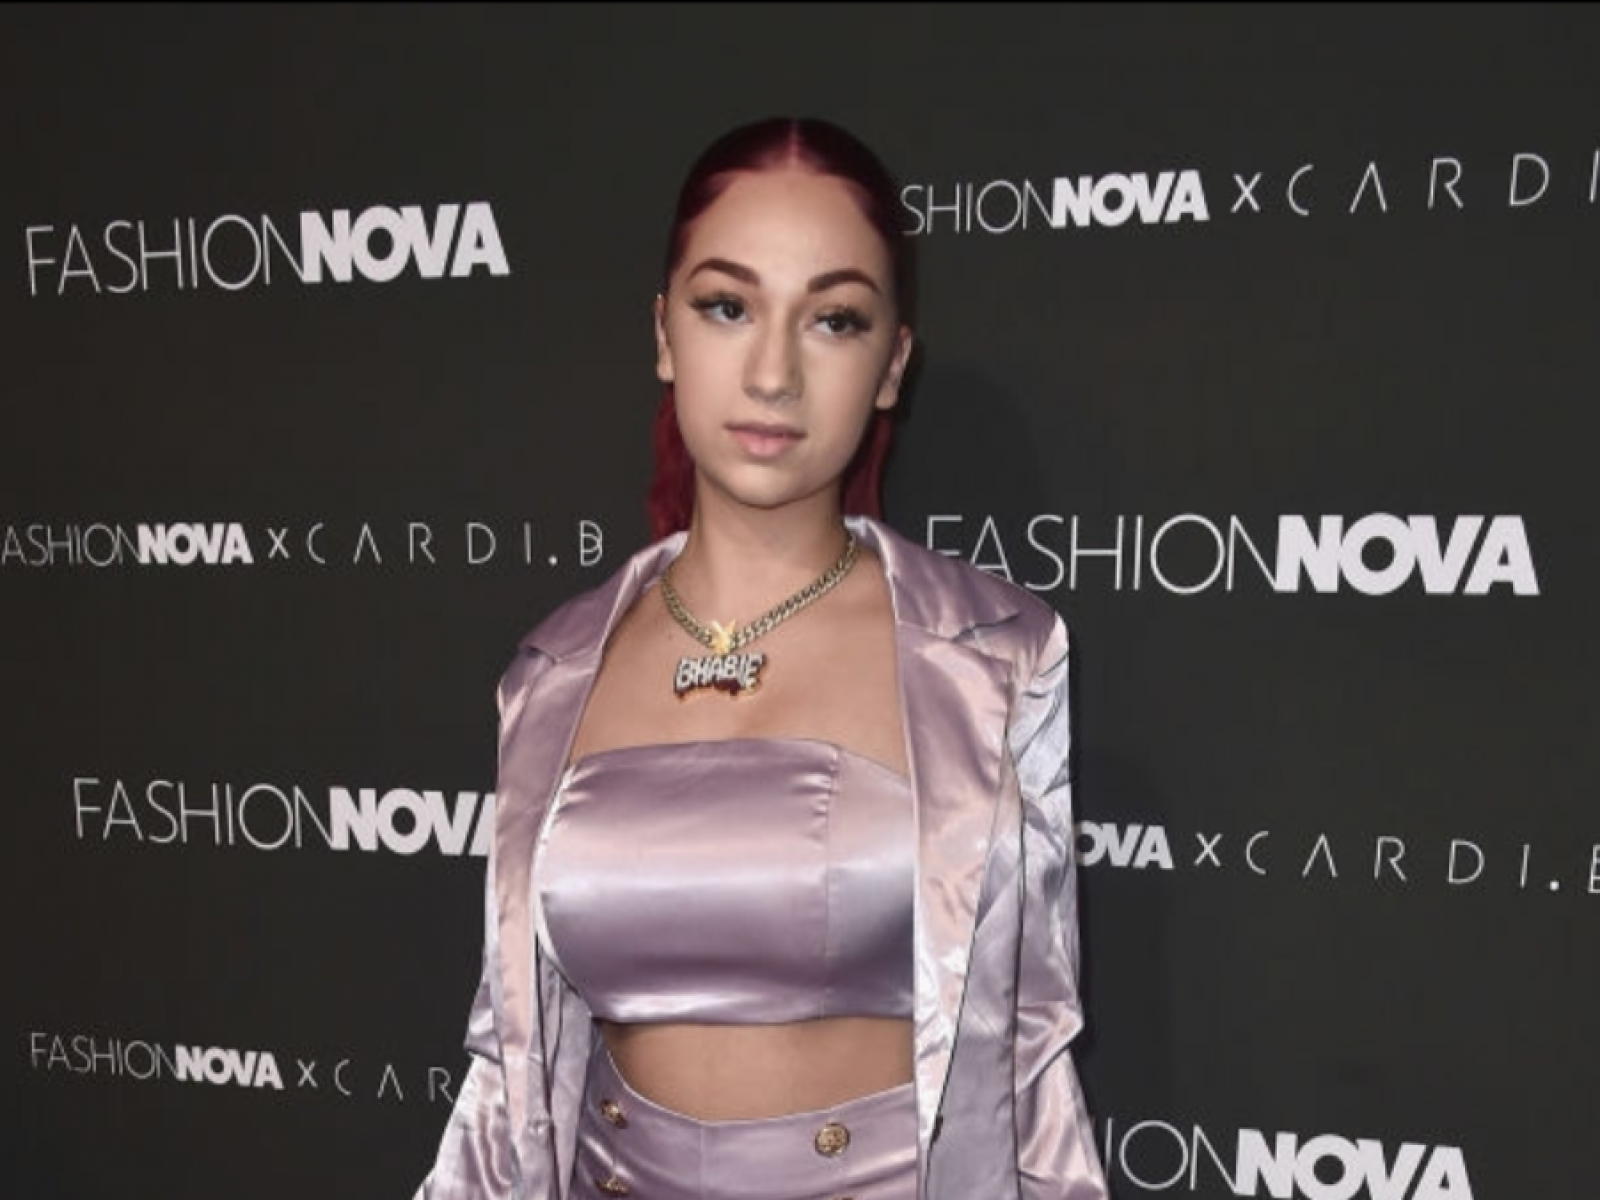 undskyld En god ven Bloom How Old Is Bhad Bhabie? 'Child' Rapper Throws A Drink At Iggy Azalea